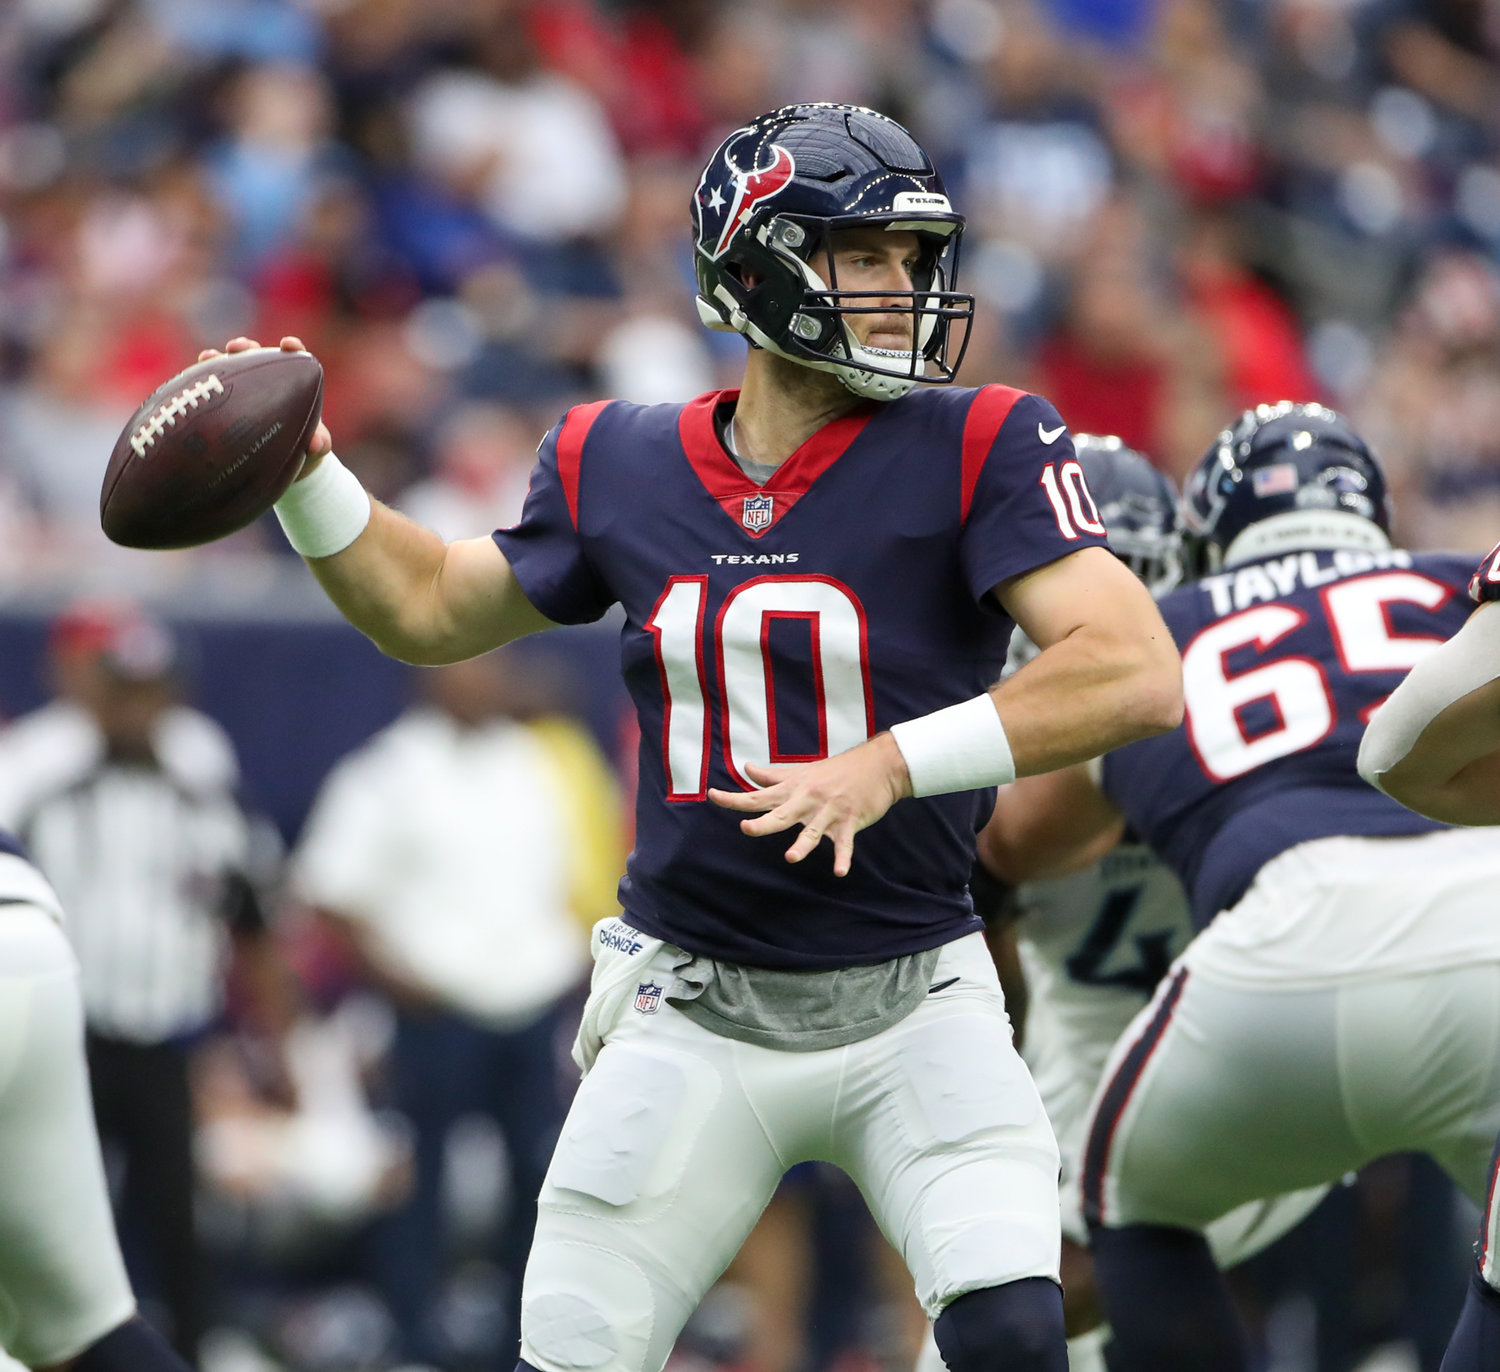 Houston Texans quarterback Davis Mills (10) looks to pass during an NFL game between the Texans and the Titans on Jan. 9, 2022 in Houston, Texas.